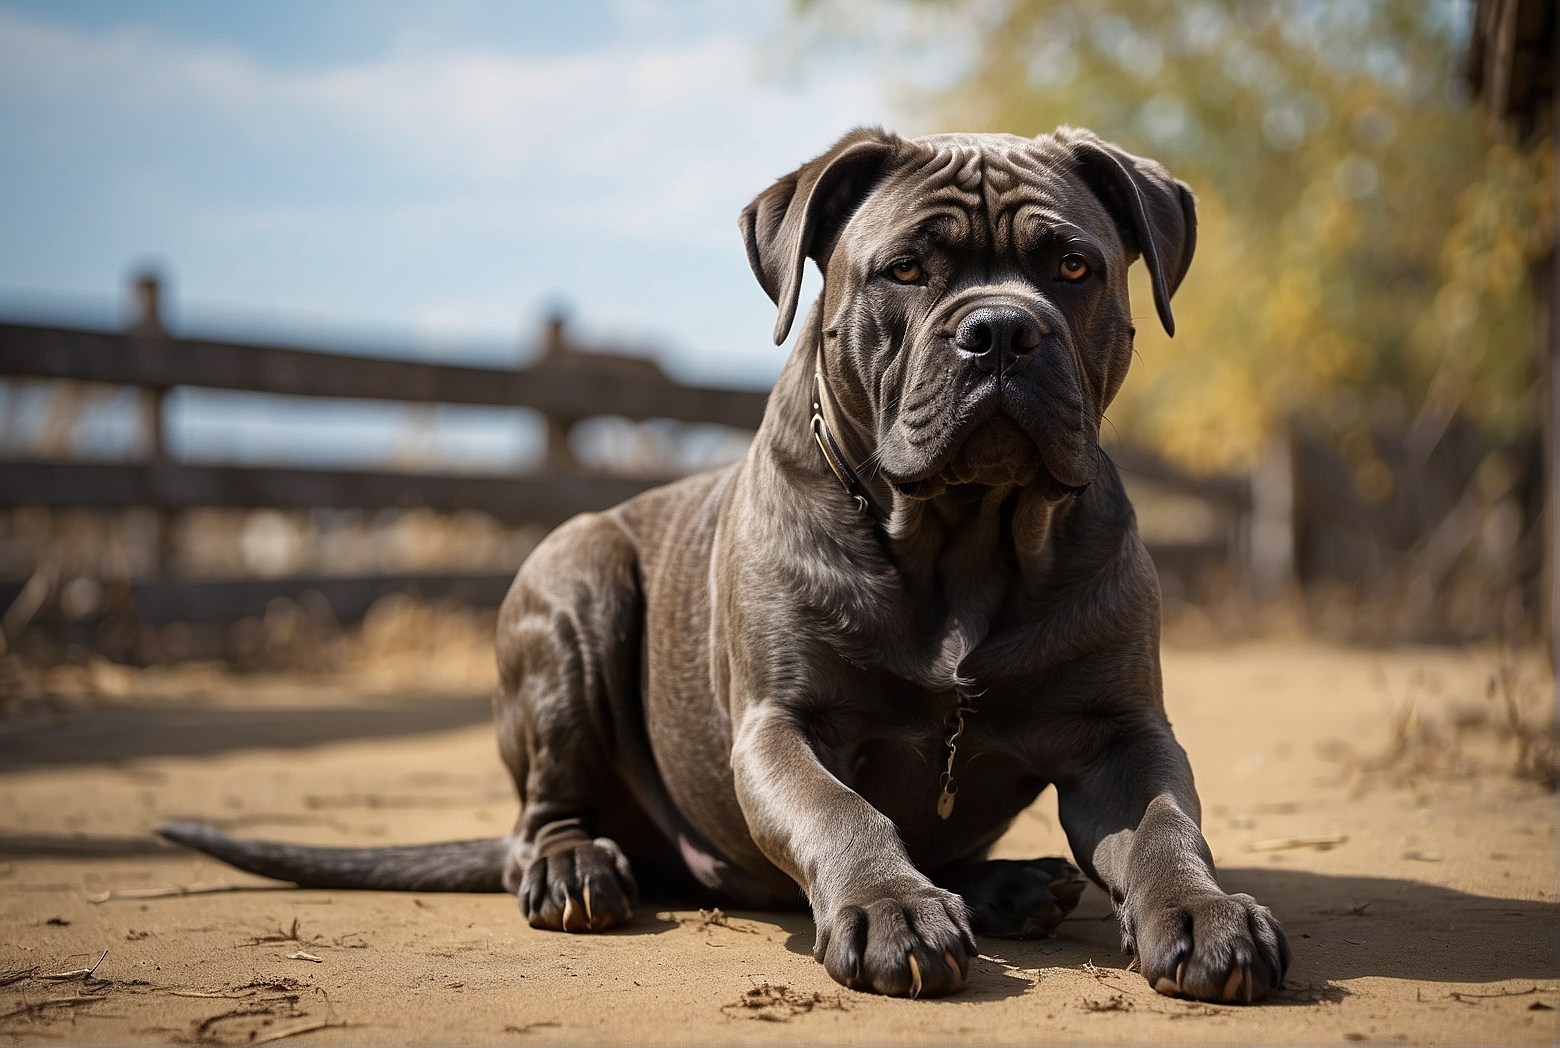 States with Bans on Cane Corso